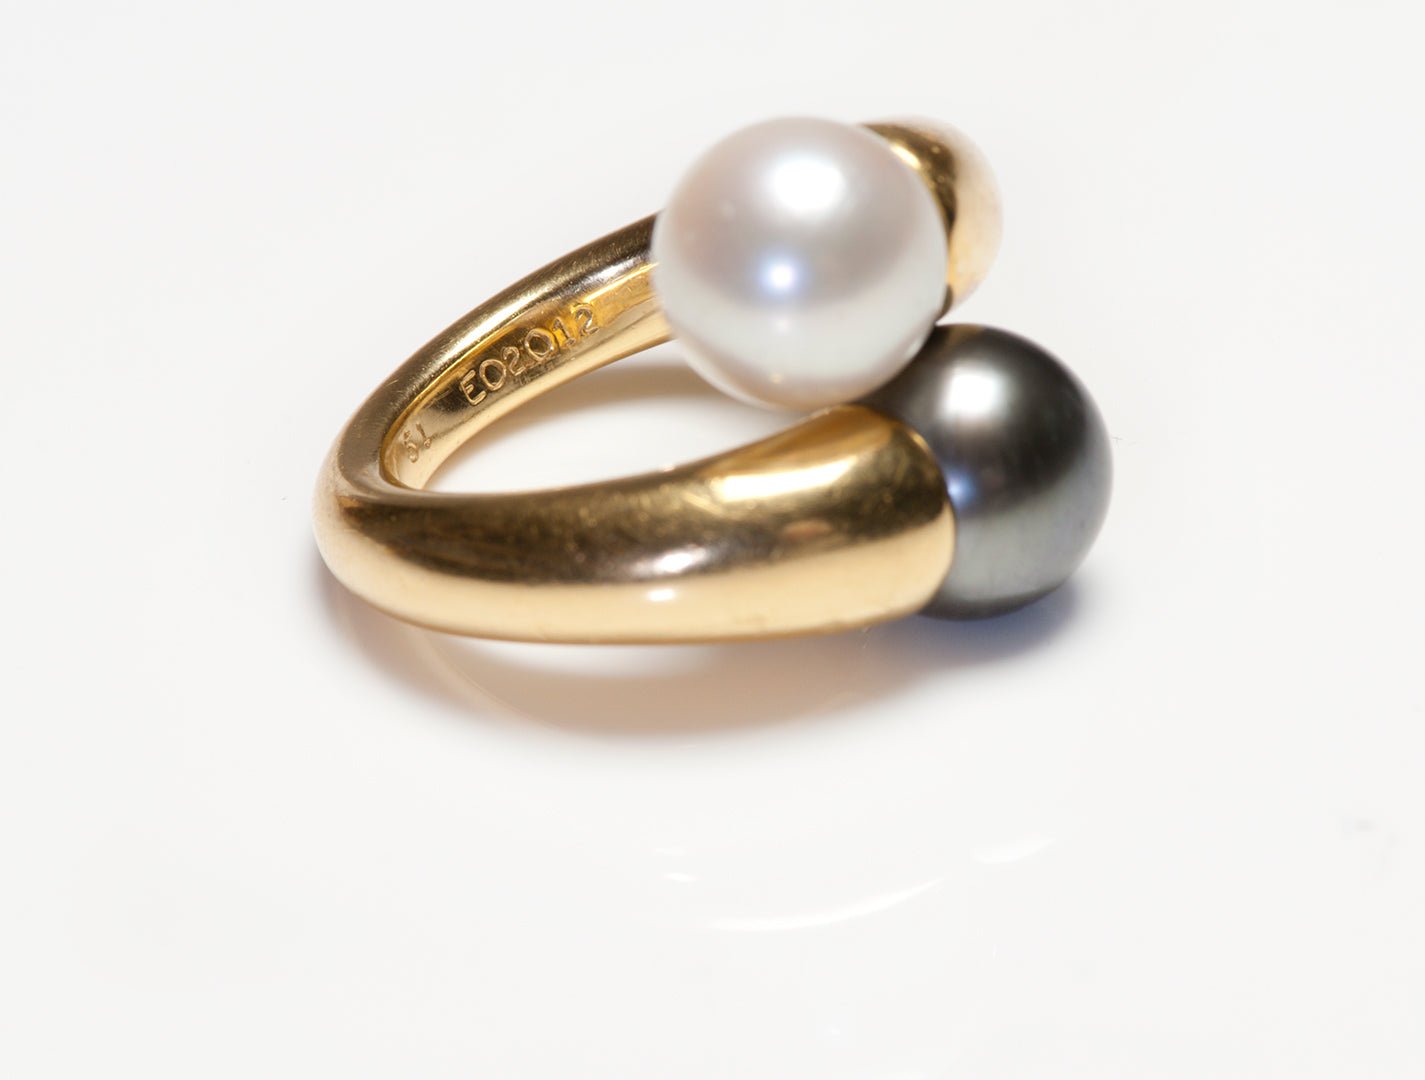 Cartier 18K Yellow Gold Pearl Toi Et Moi Ring